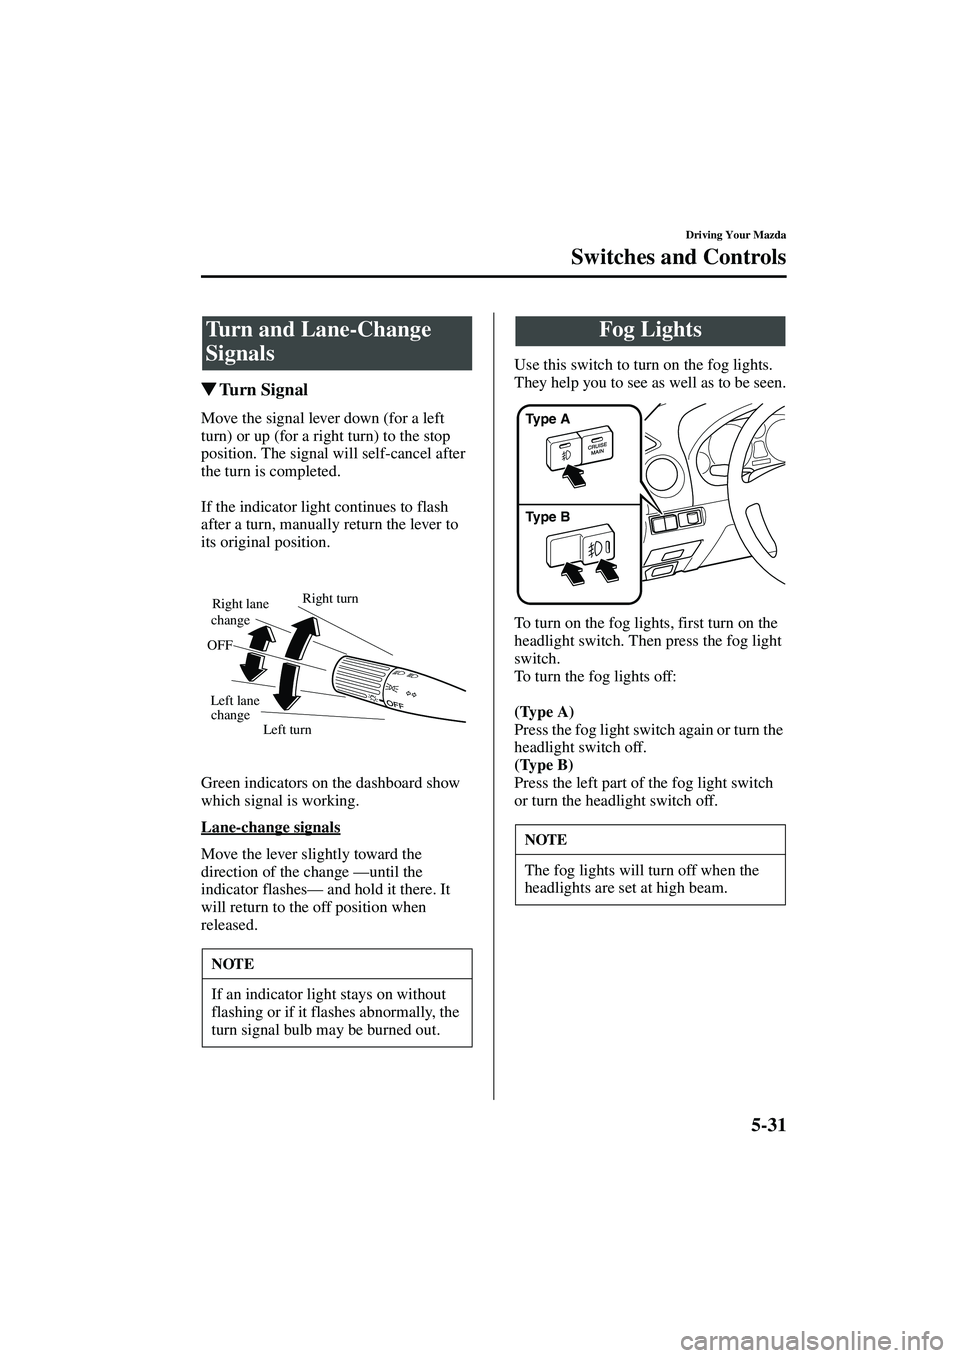 MAZDA MODEL MX-5 MIATA 2003  Owners Manual 5-31
Driving Your Mazda
Switches and Controls
Form No. 8R09-EA-02G
Tu r n  S i g n a l
Move the signal lever down (for a left 
turn) or up (for a right turn) to the stop 
position. The signal will se